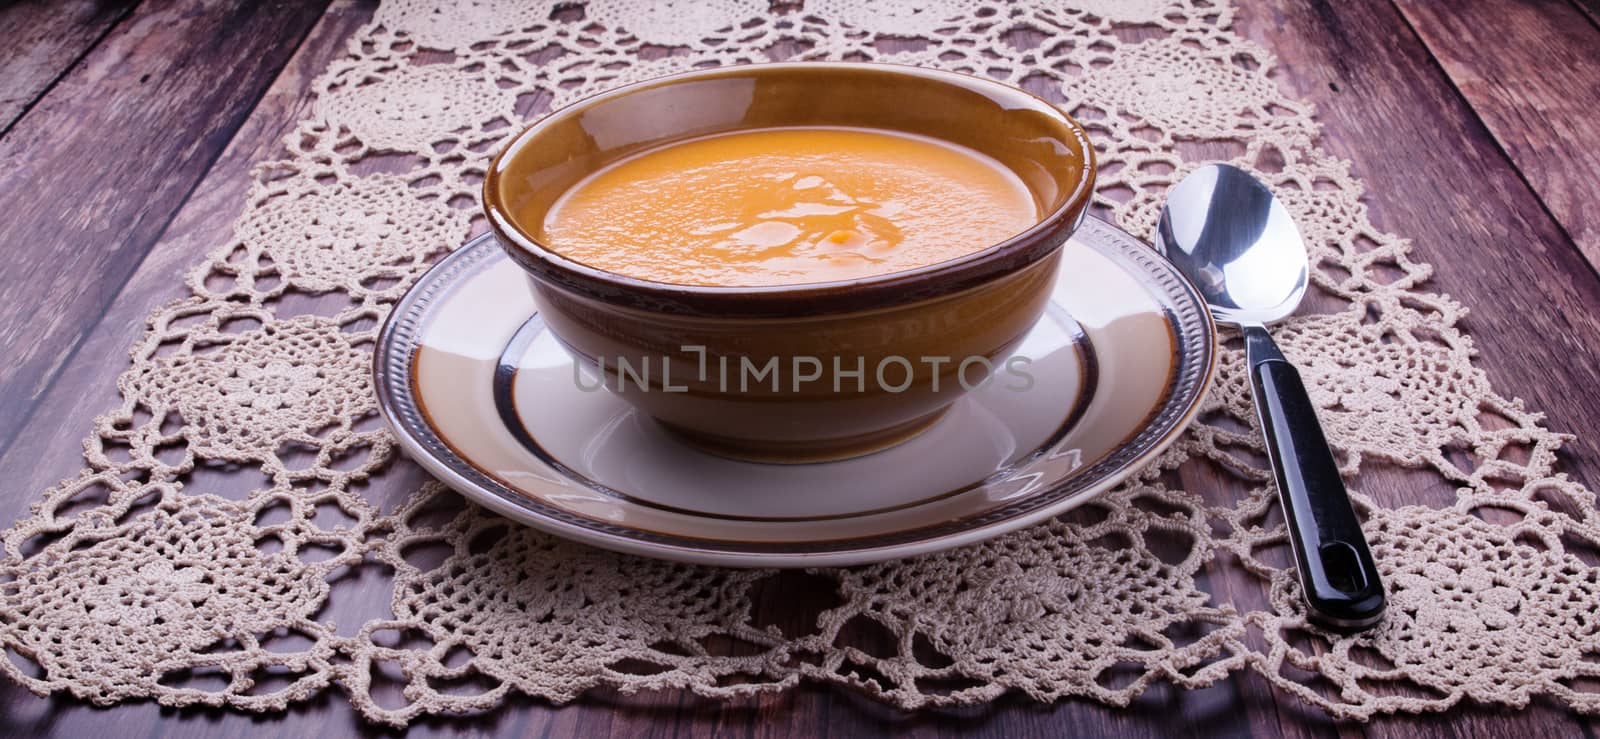 Carrot cream-soup in a bowl by lanalanglois